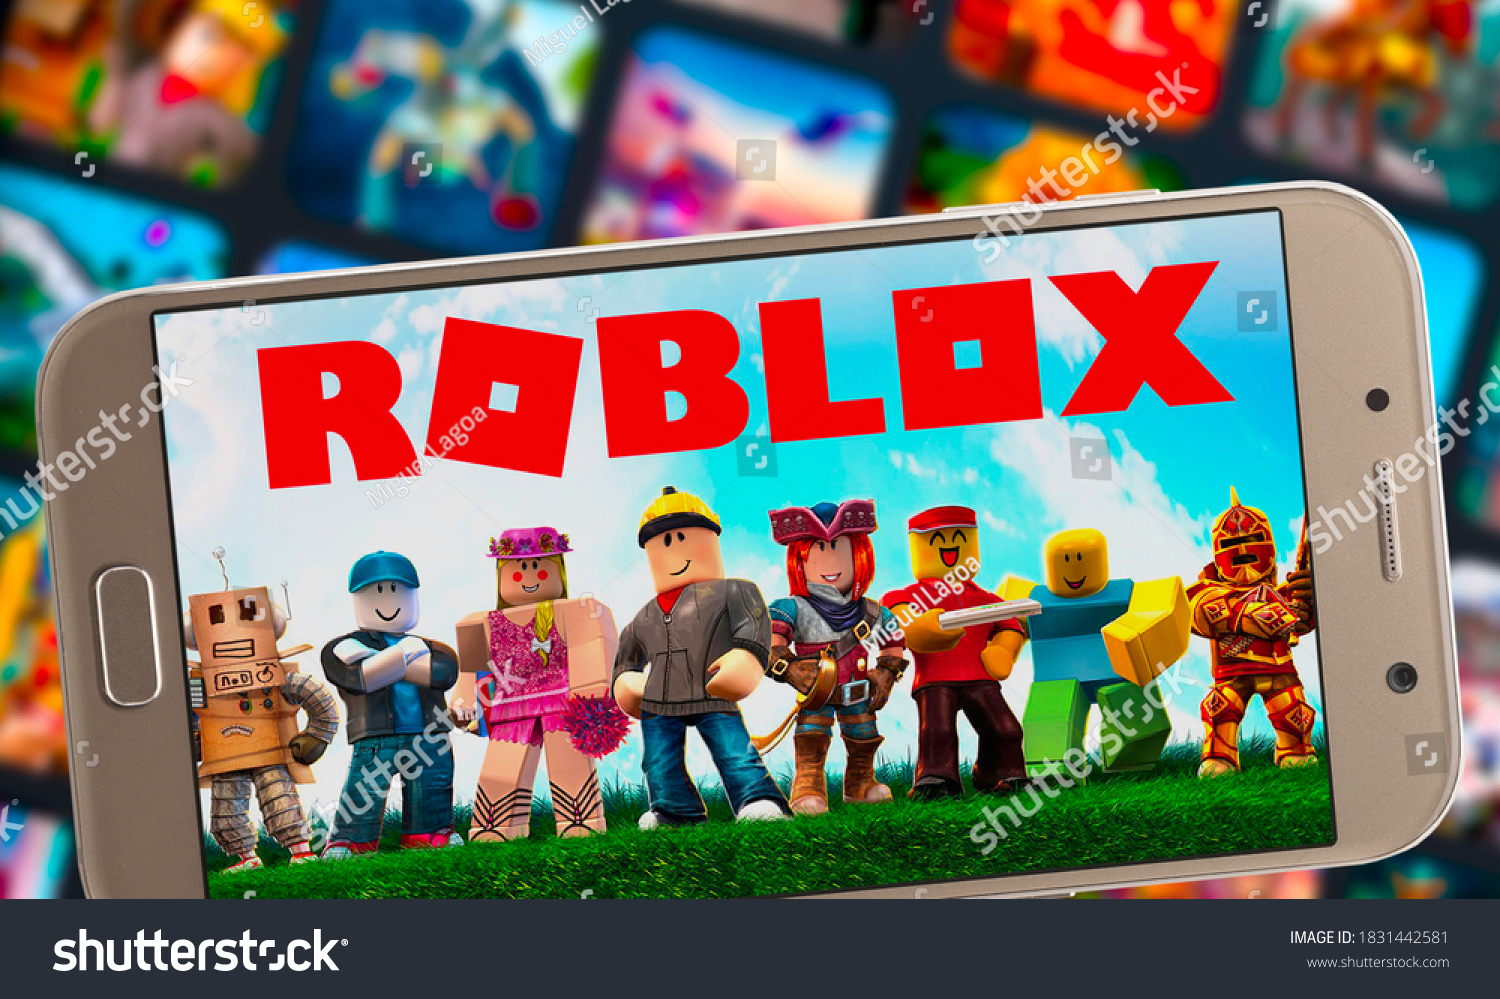 Roblox Notebook Screen Sao Paulo Brazil Stock Photo Edit Now 1831442581 - edit roblox games on mobile